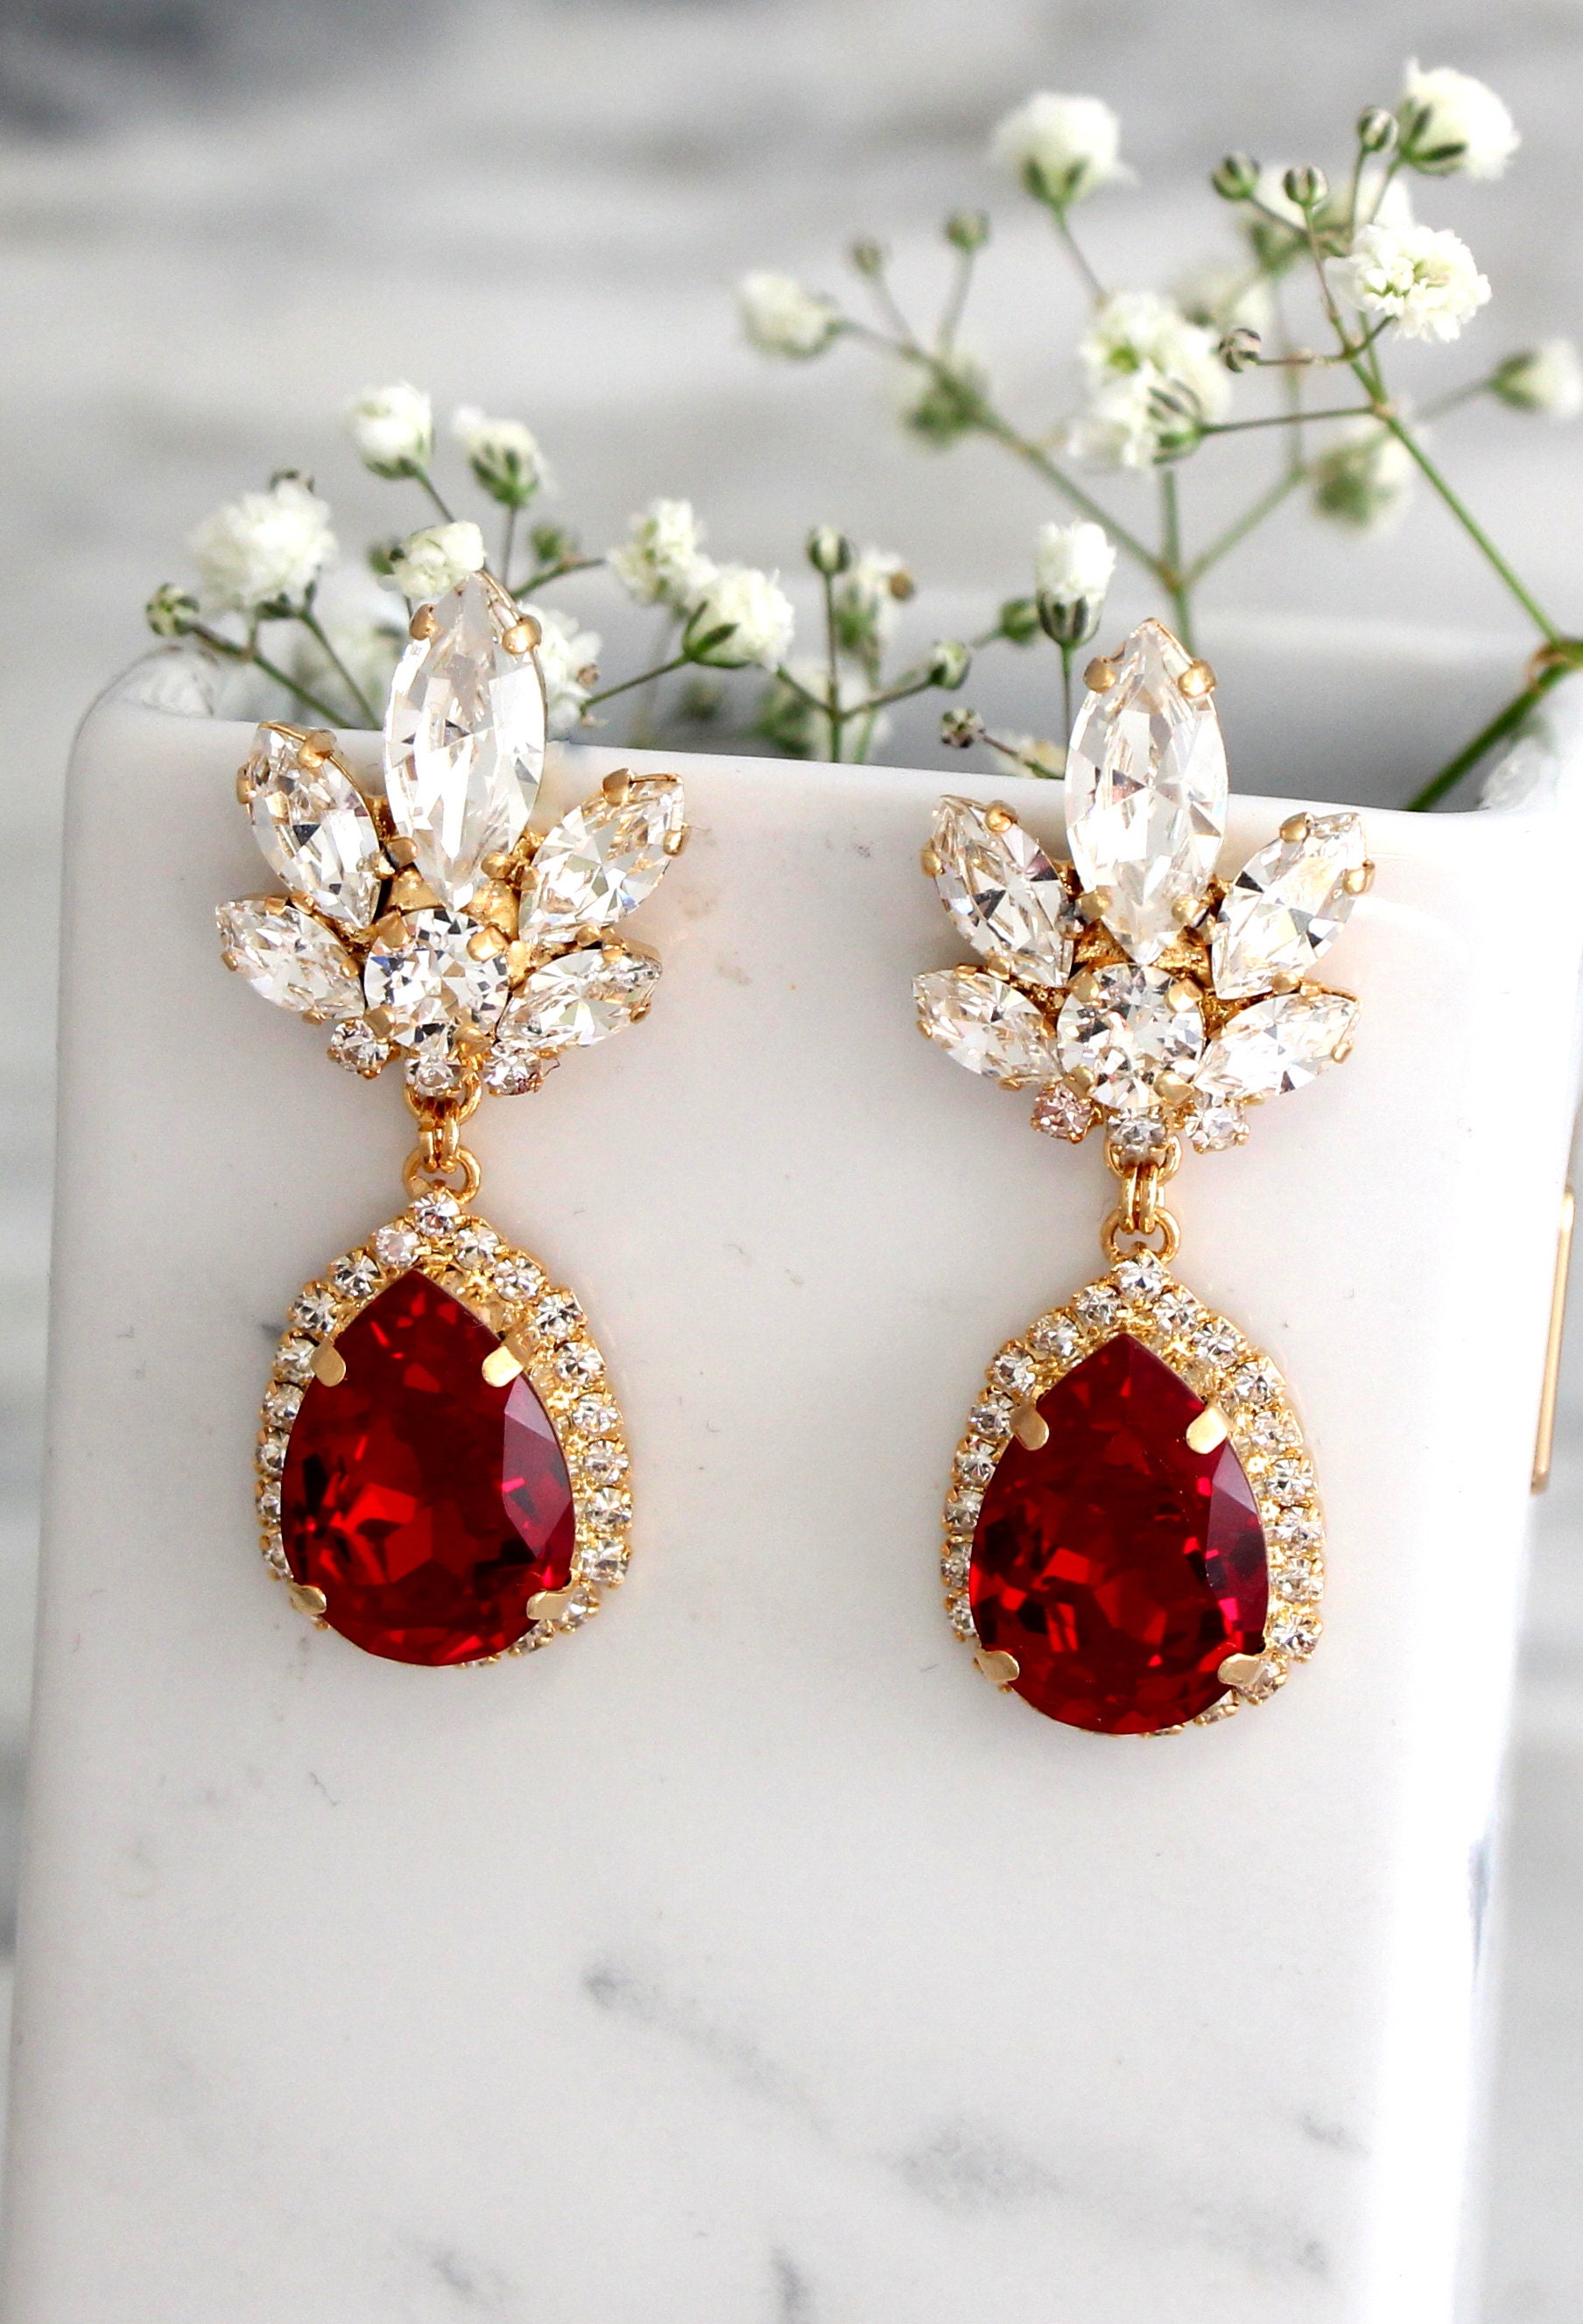 Buy Red Stone Circular Design with Golden Polish Earring for Women for Best  Price, Reviews, Free Shipping